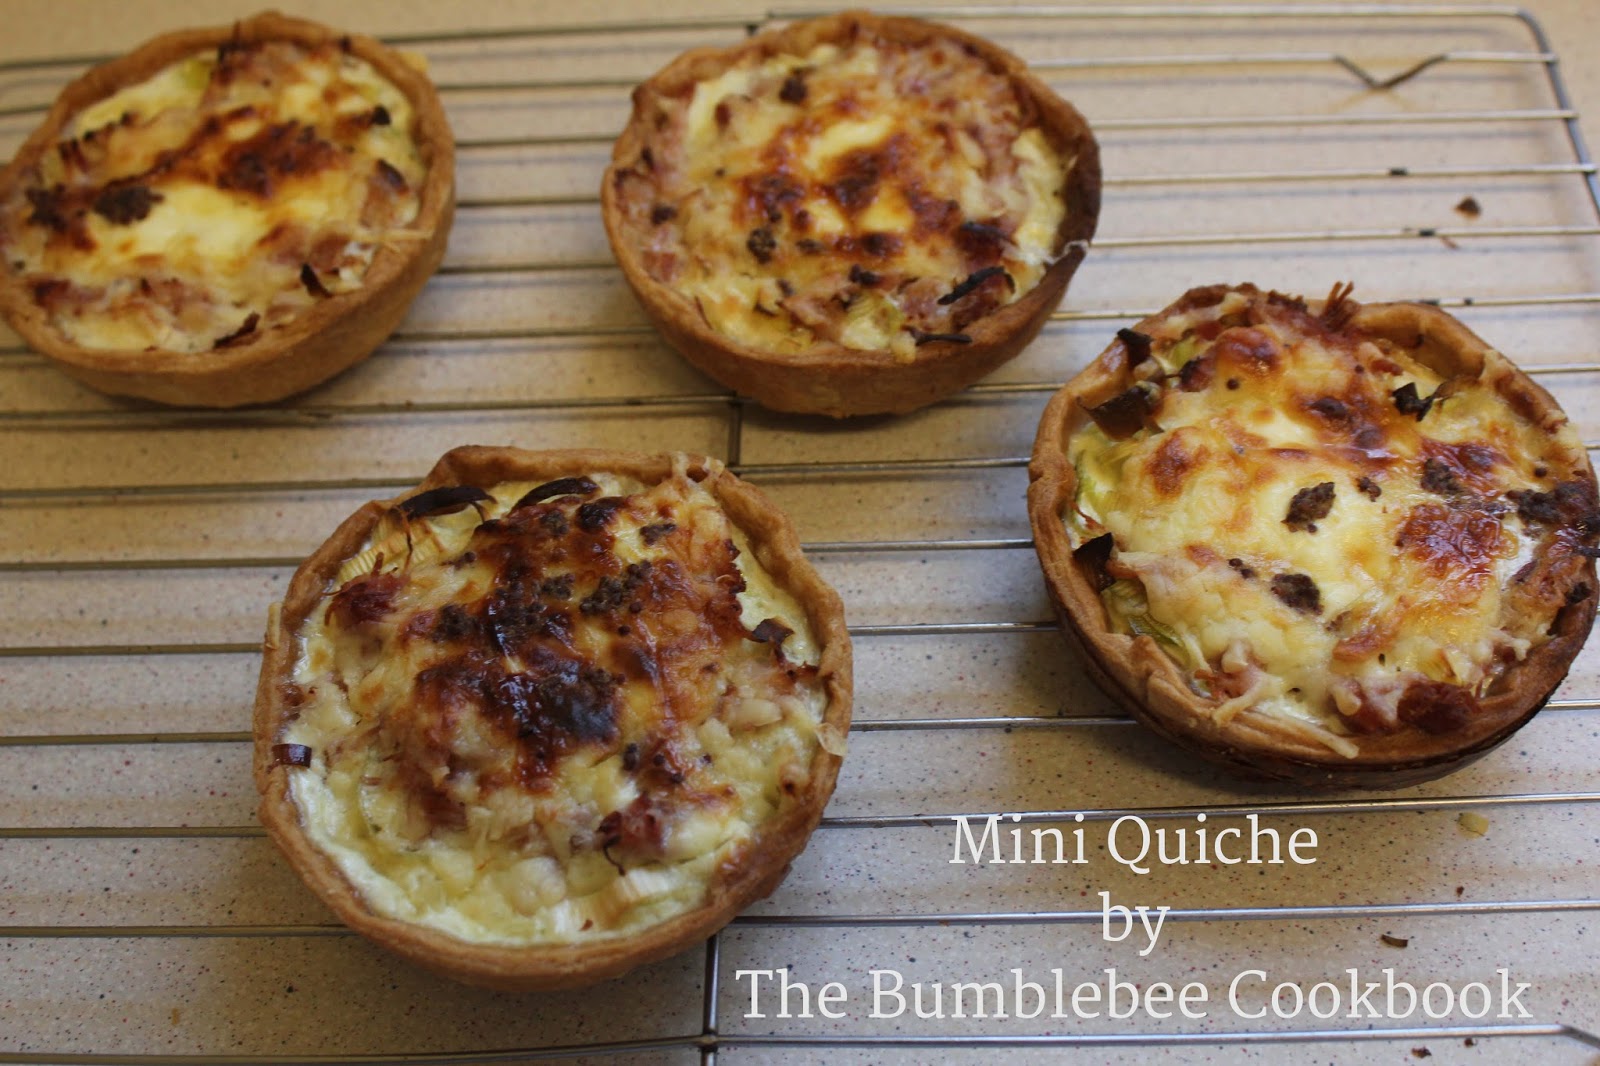 The Bumble Bee Cook Book: An Easy 'Mini Quiche' Recipe